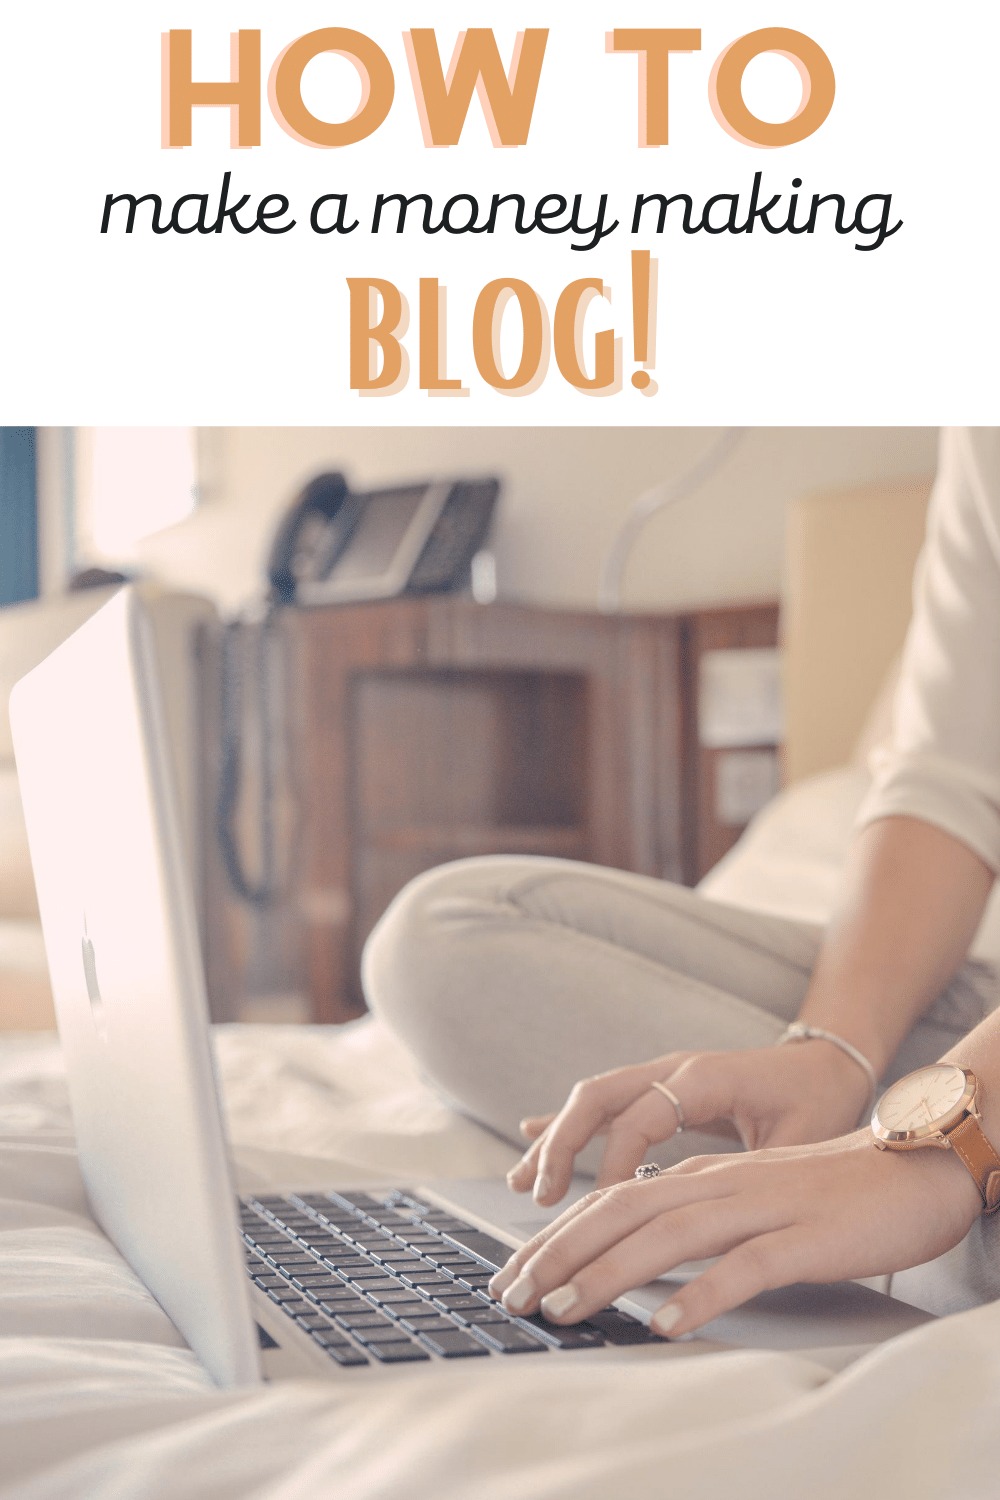 how to start a blog and make money from it